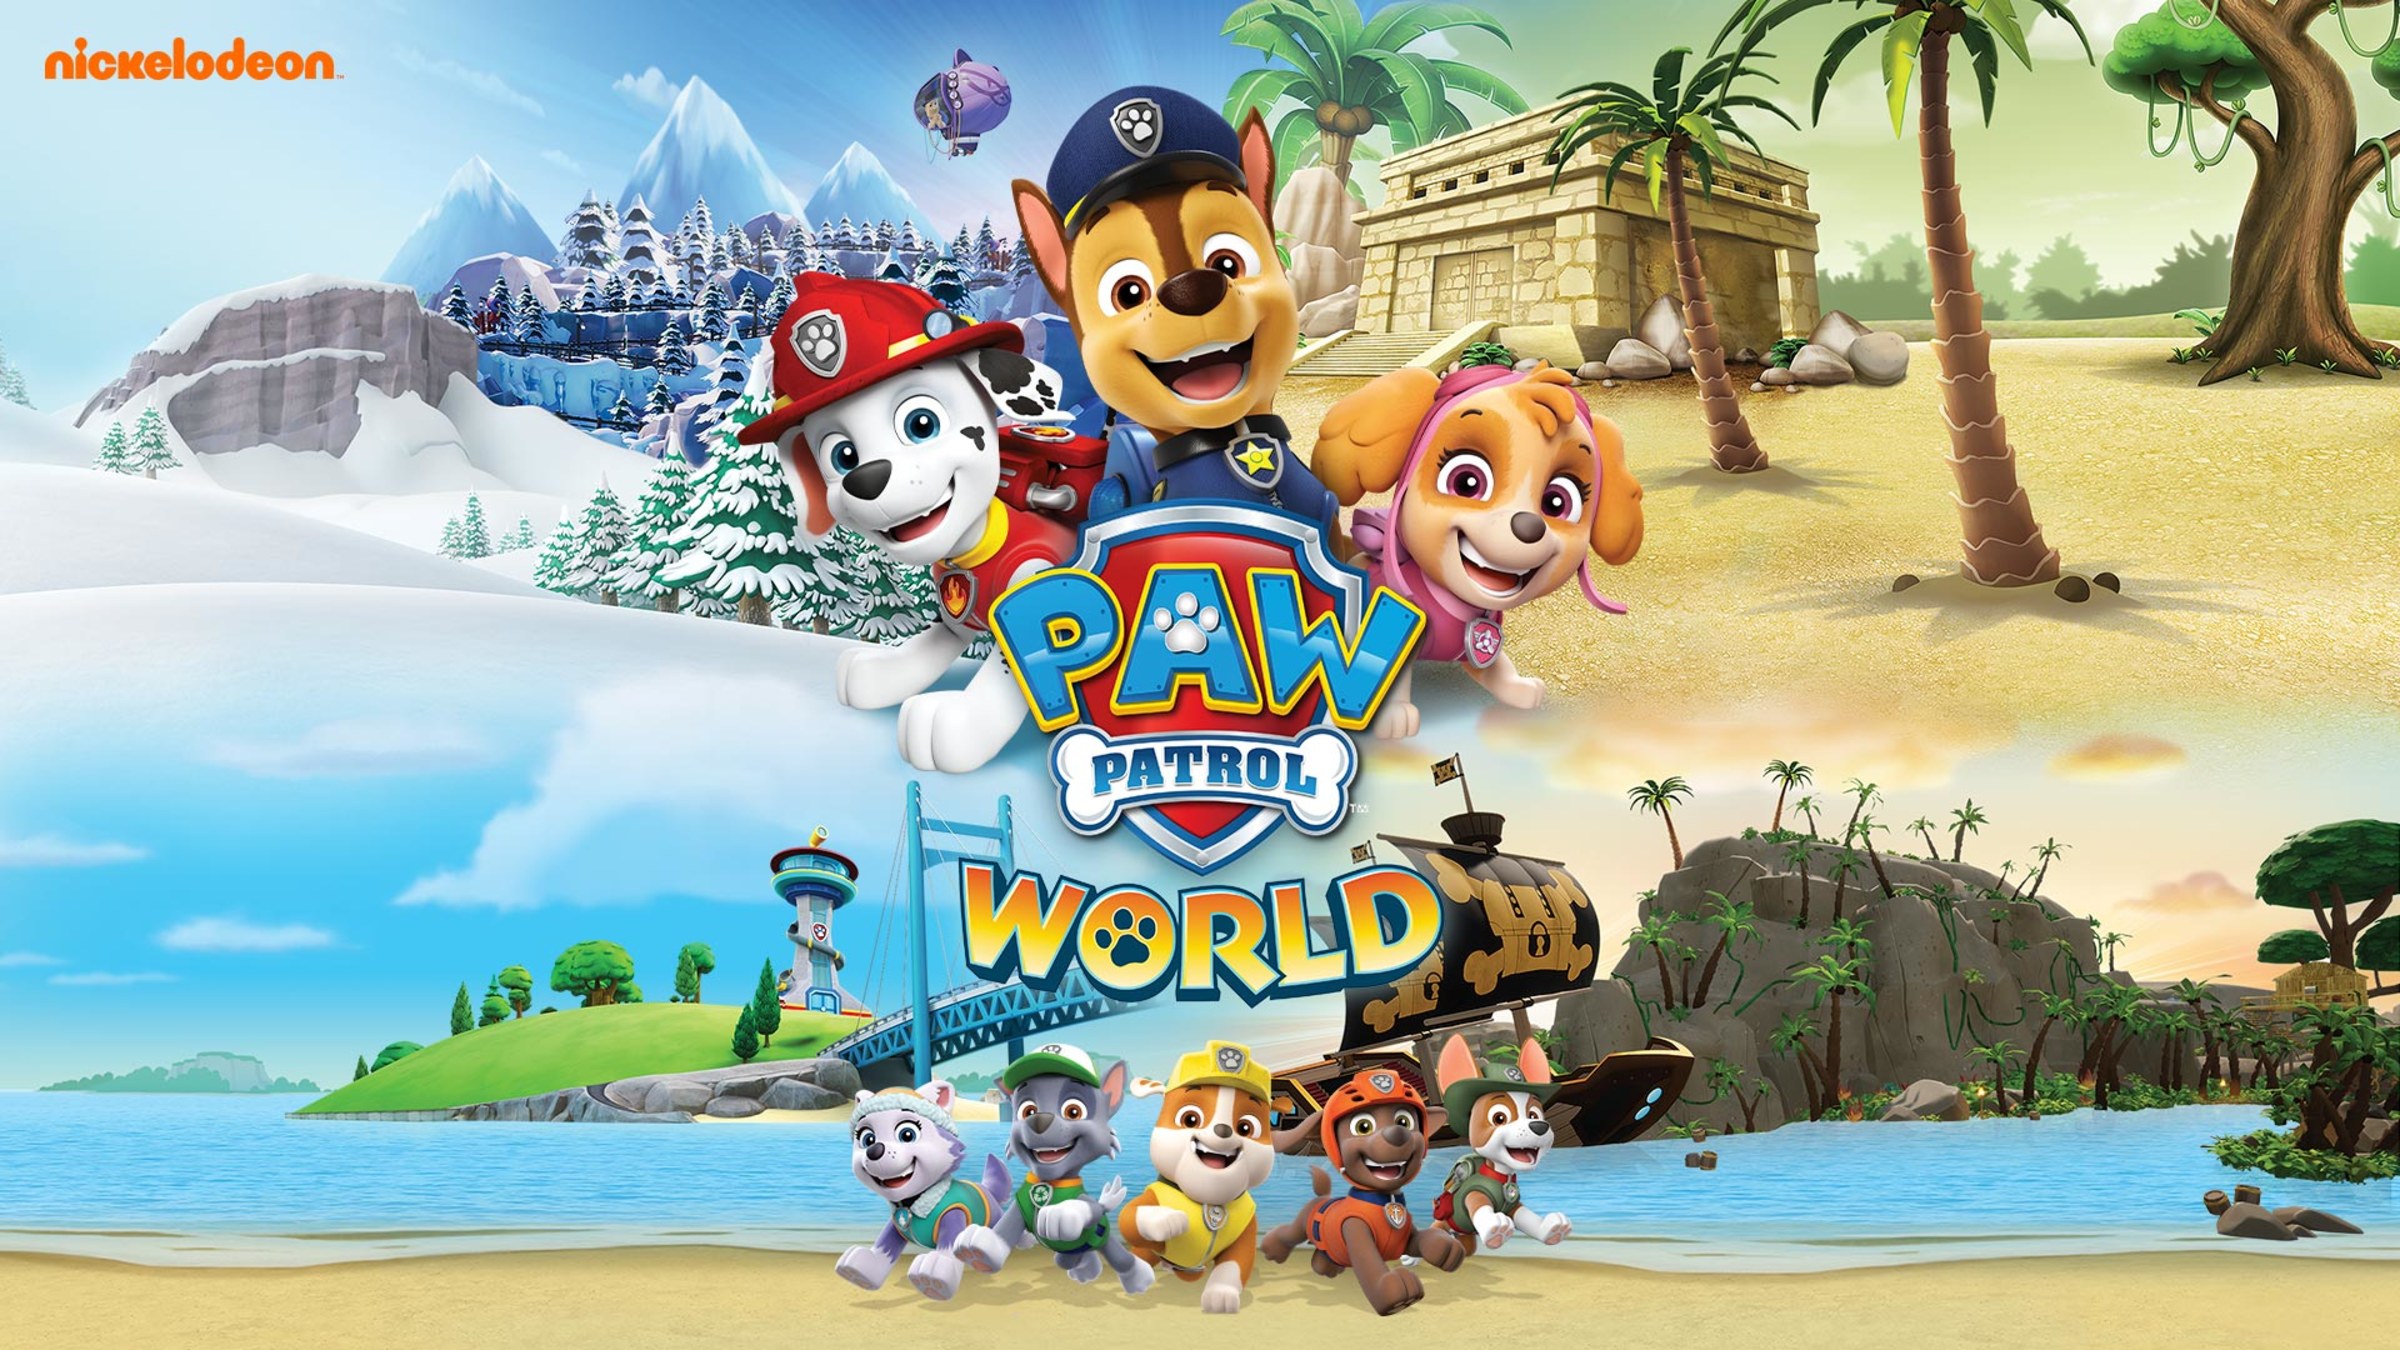 PAW Patrol is on a roll! PAW - Nickelodeon Universe®